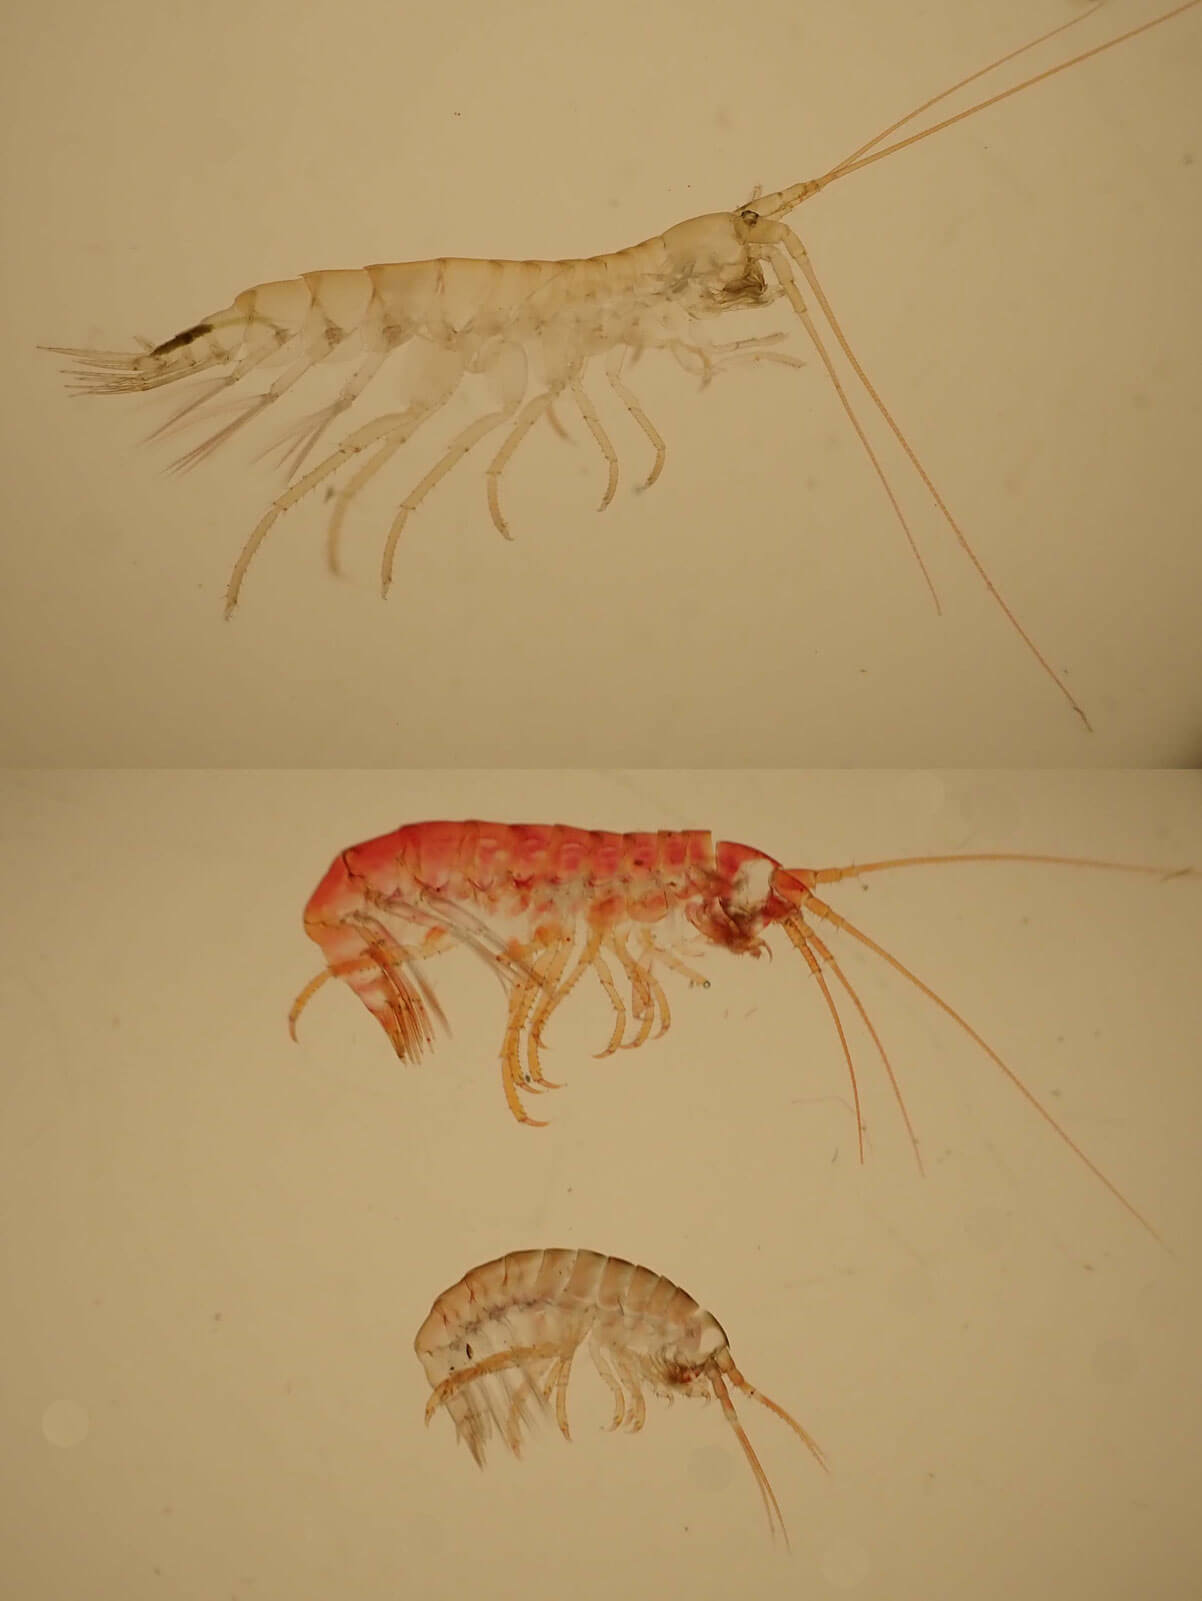 Three molts - top is large and mostly transparent, middle is medium sized and reddish, bottom is small and brown/transparent.